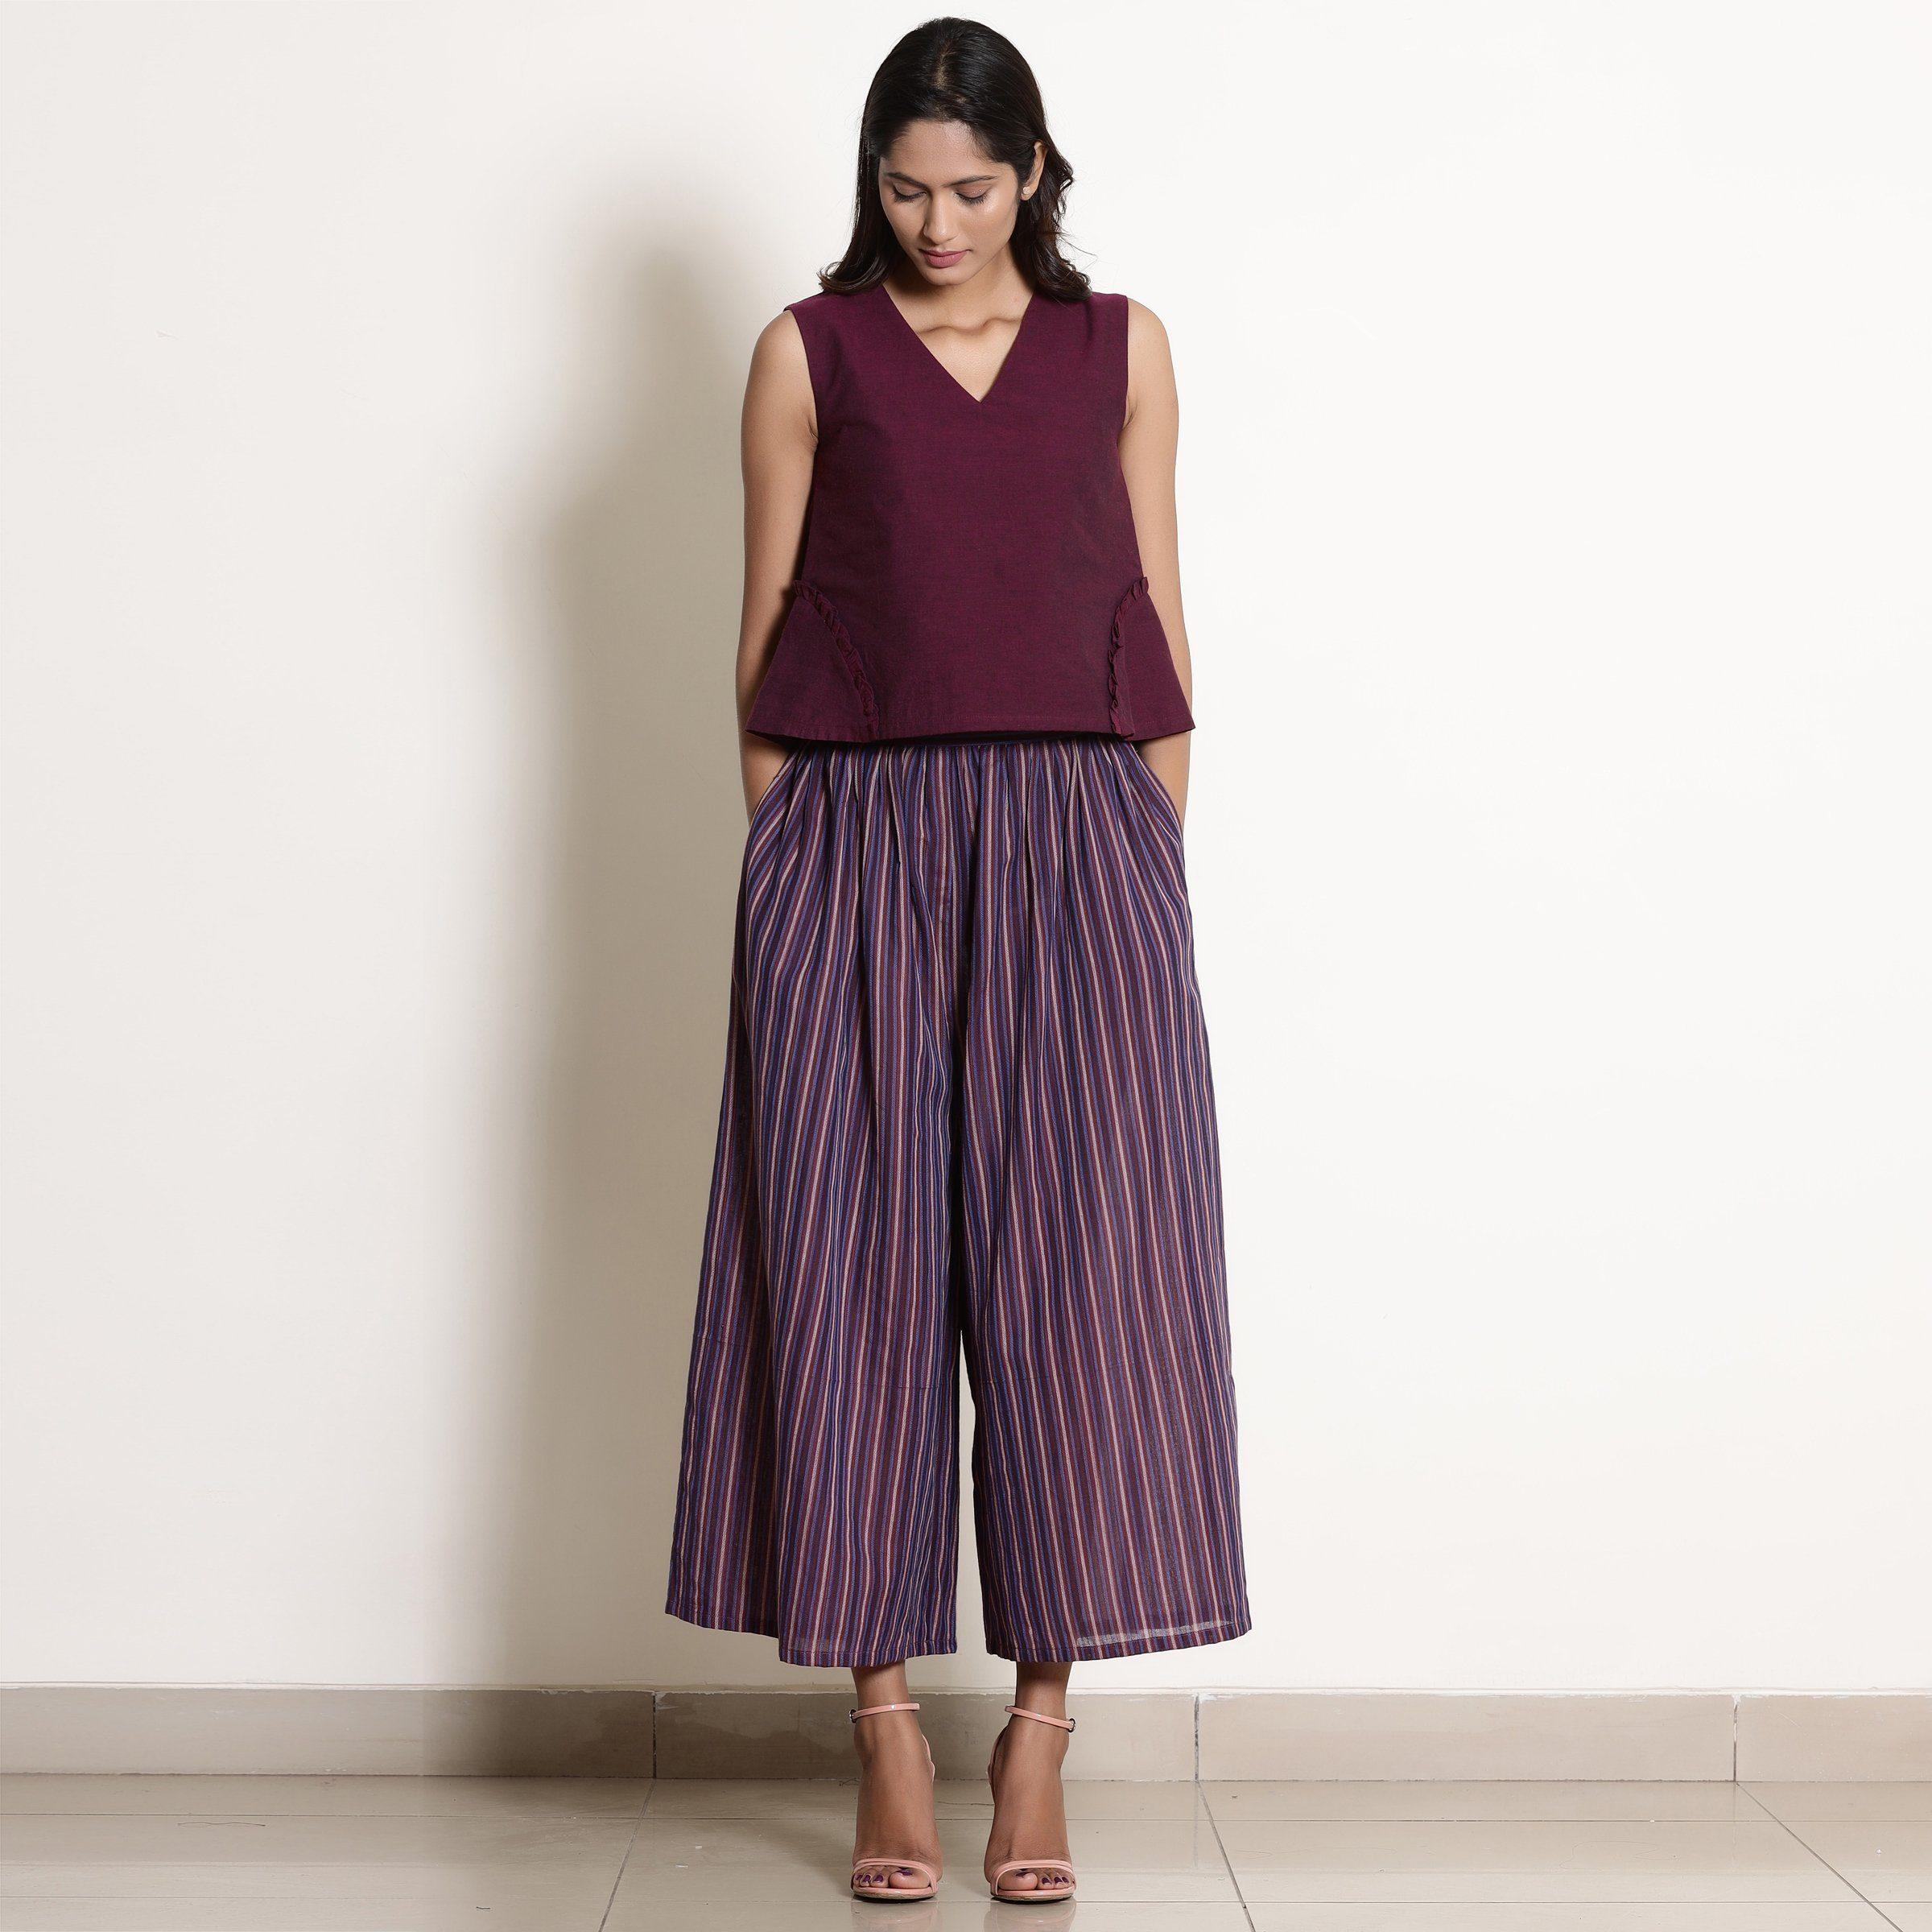 Red High Rise Culottes |193101901-chili-Oil